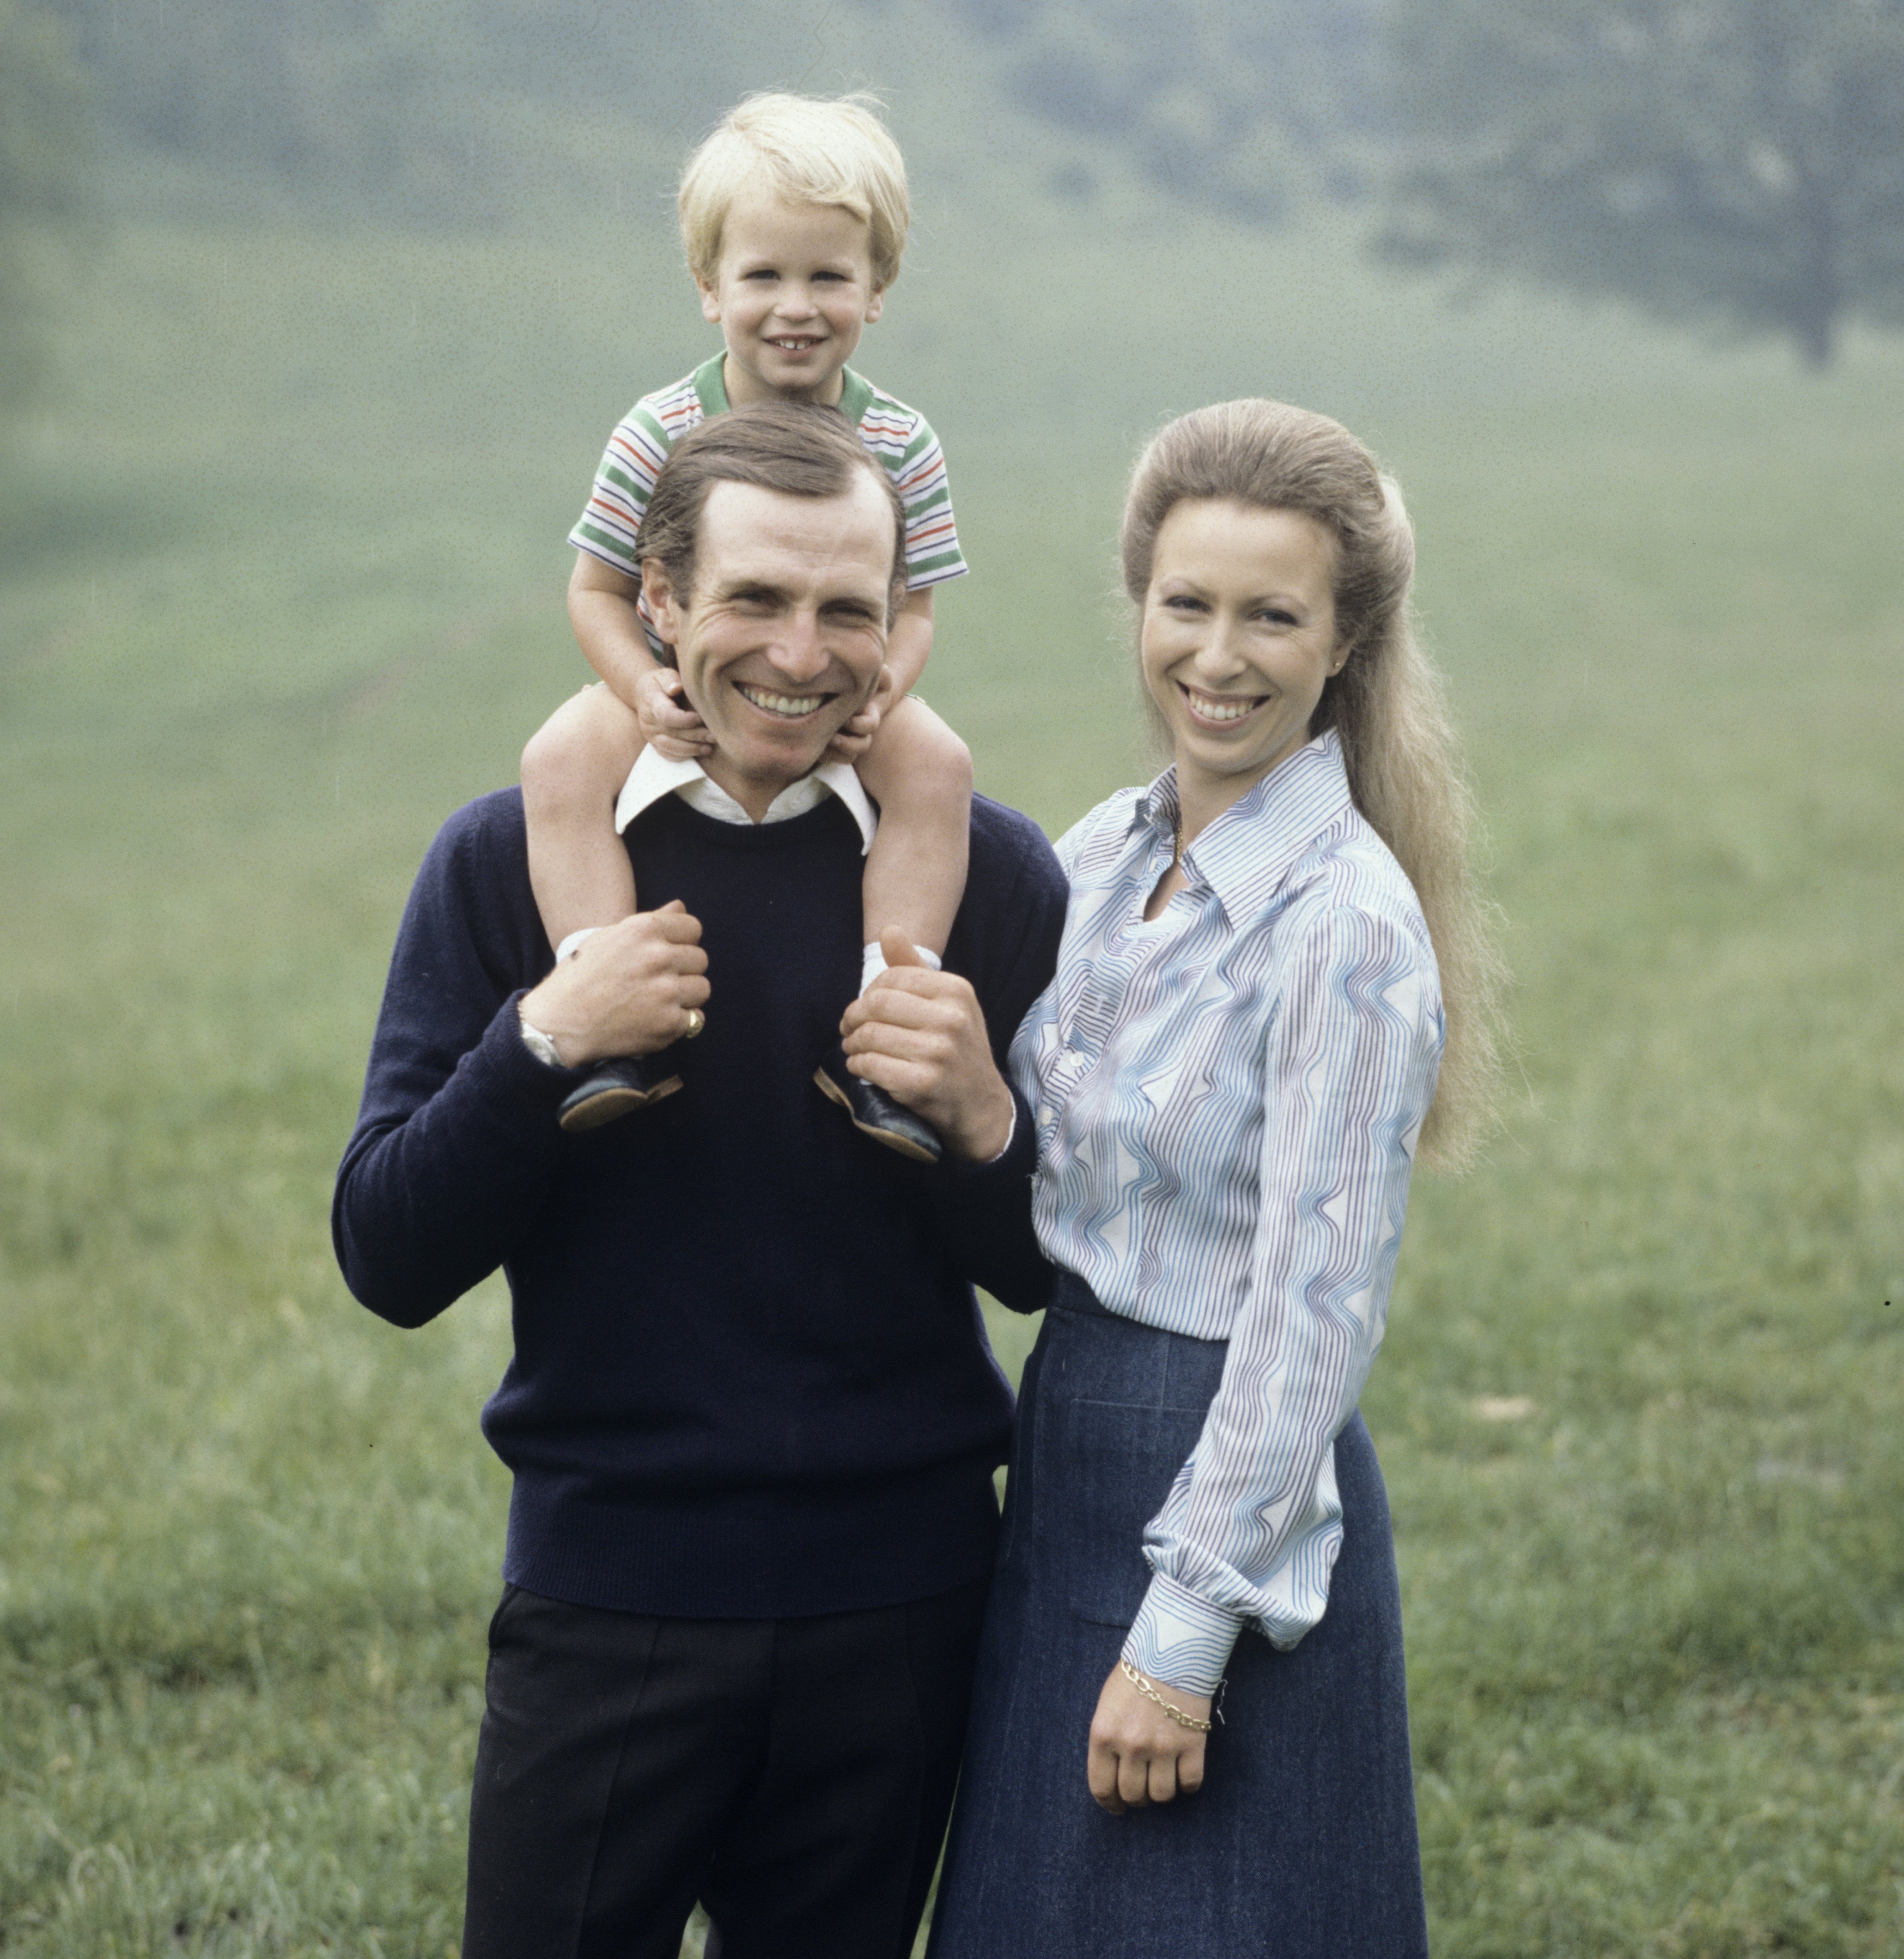 Princess Anne and Captain Mark Phillips with their son Peter Phillips in London. | Source: Getty Images